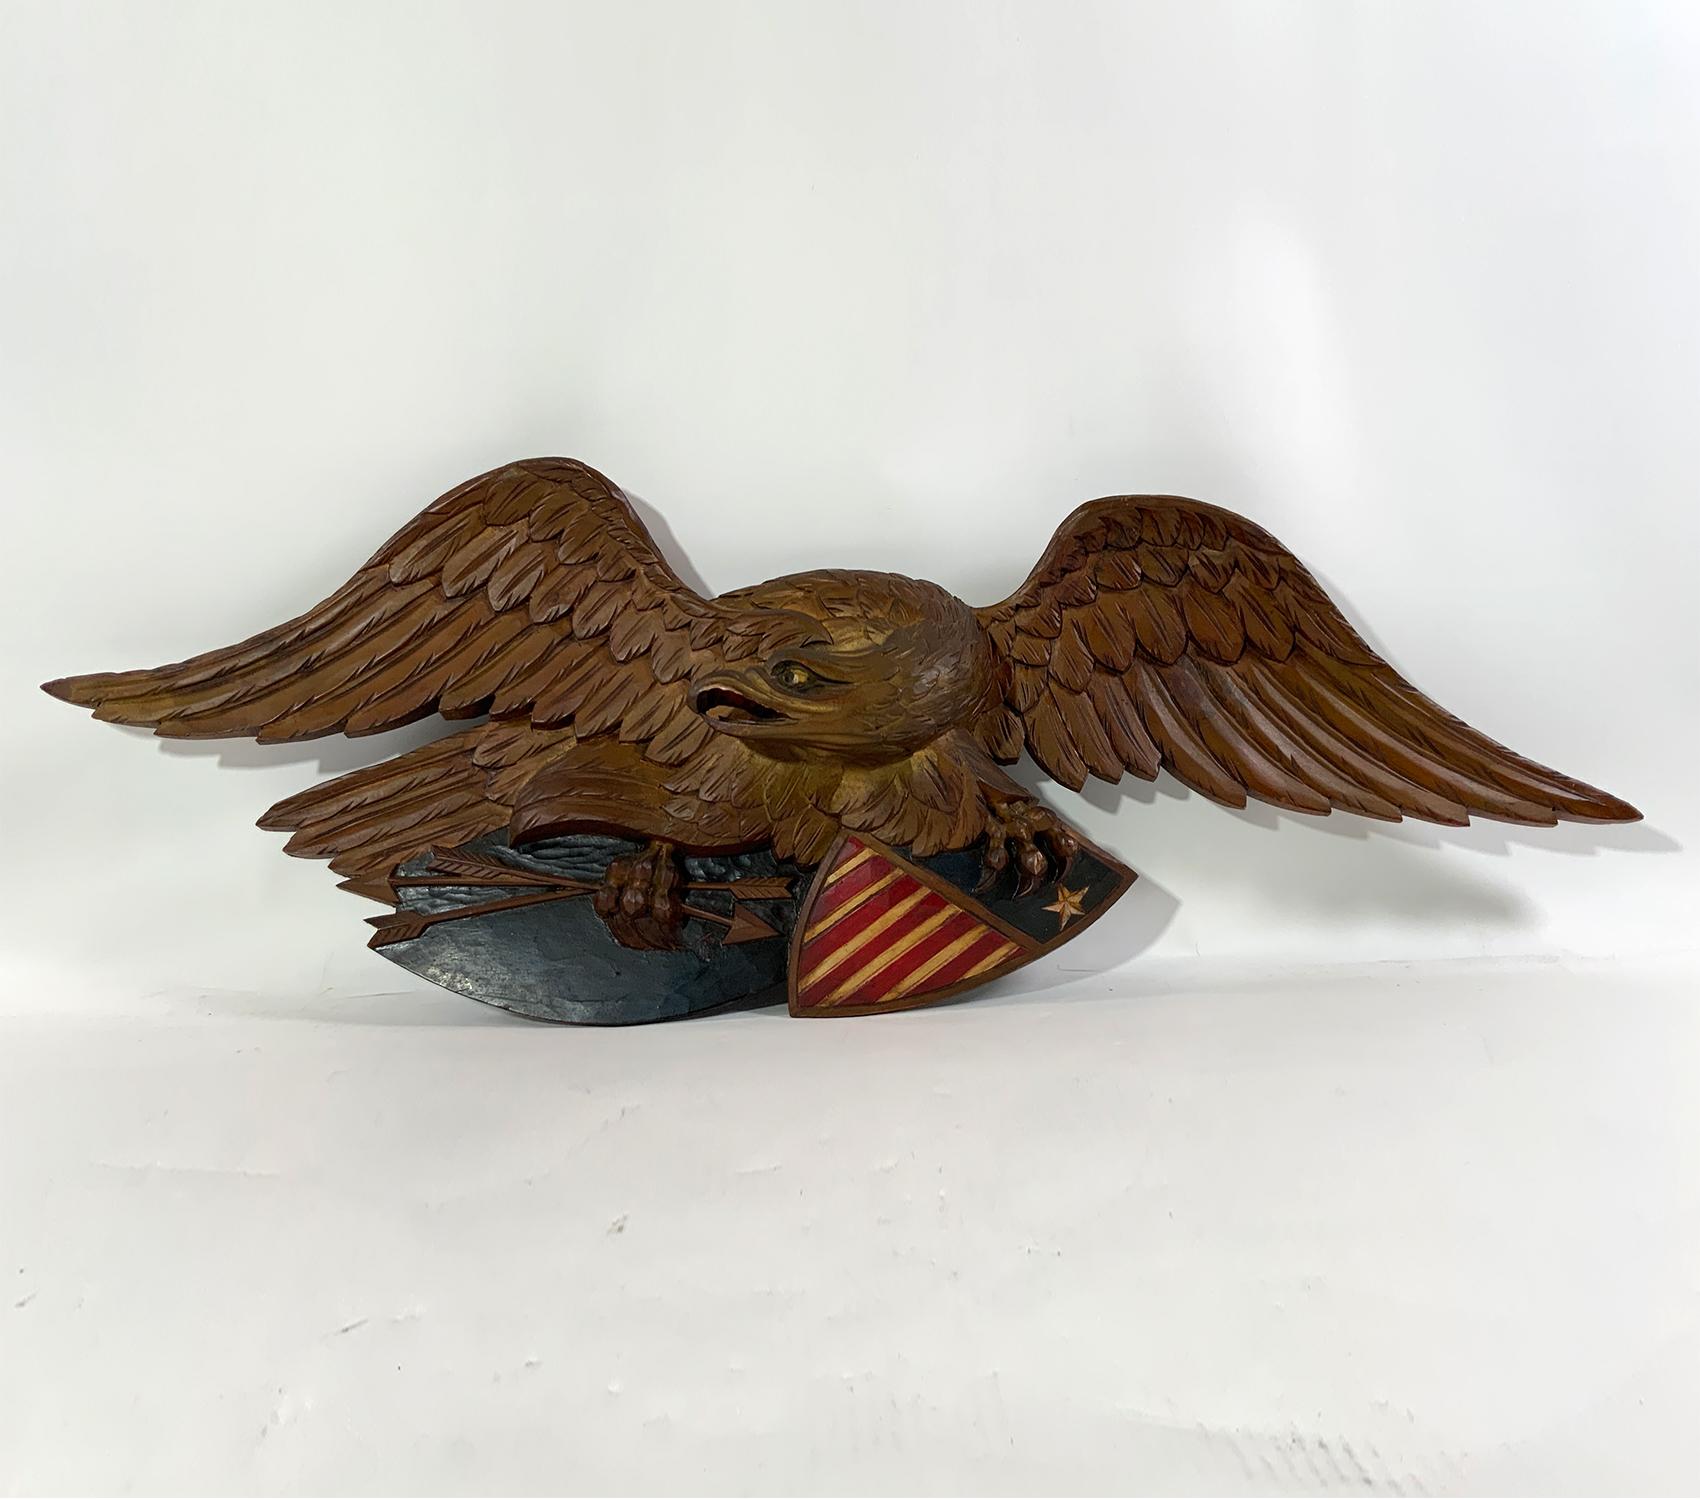 Louisburg Eagle by Artistic Carving Company of Boston. One of the larger sizes offered by this venerable Boston Carver of American Eagles. Eagle is clutching two arrows in one talon and patriotic shield on the other. With rich patina. Circa 1950.